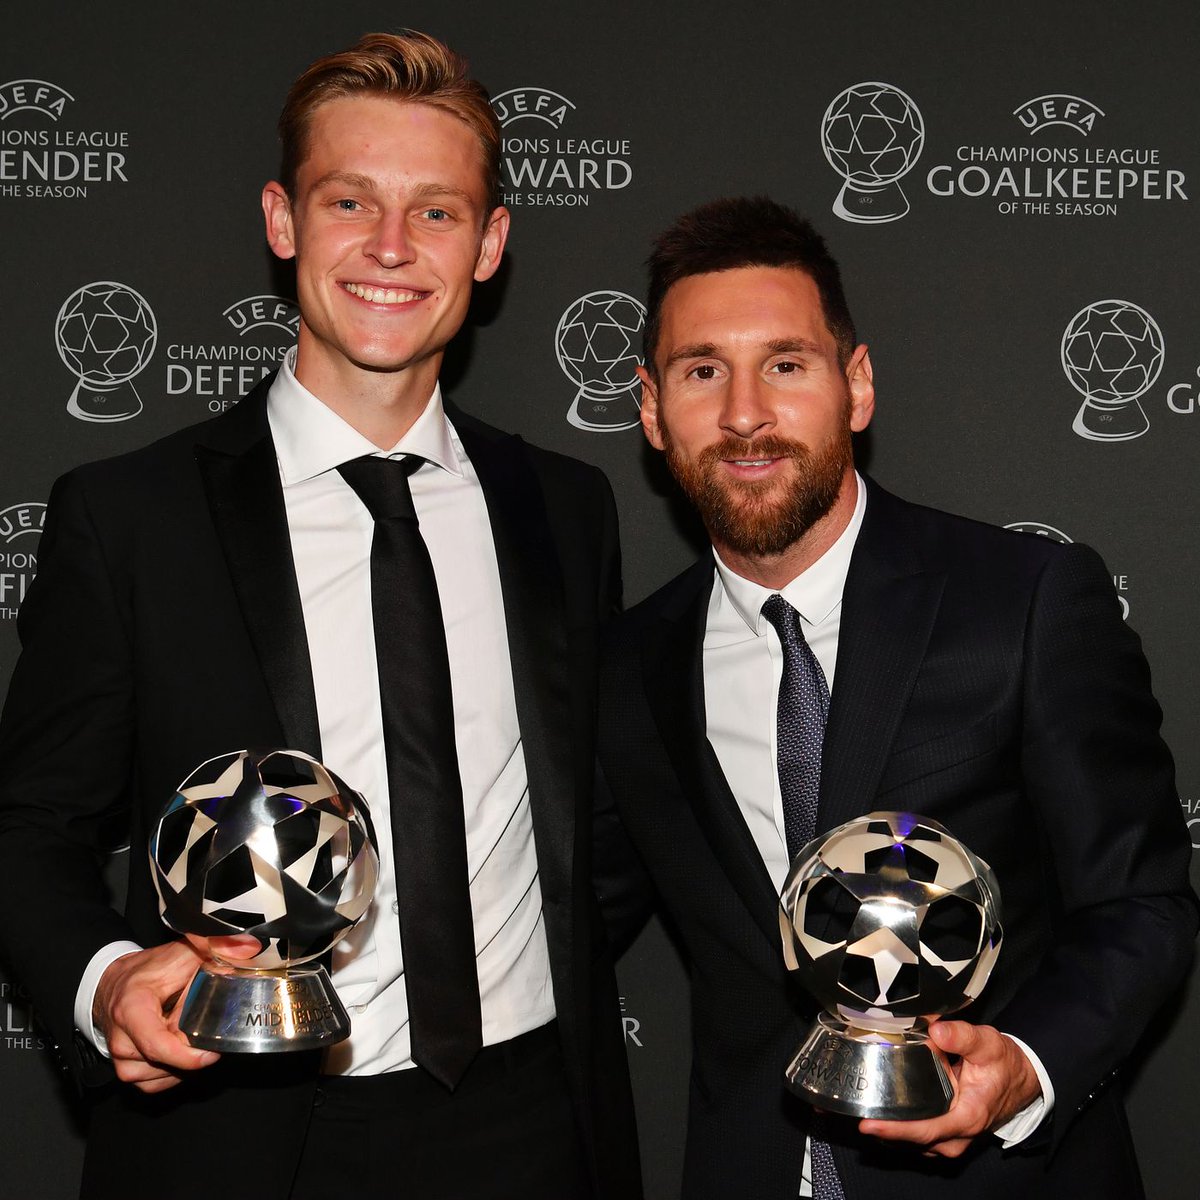 Here are Frenkie's pictures with his awards to justify this thread